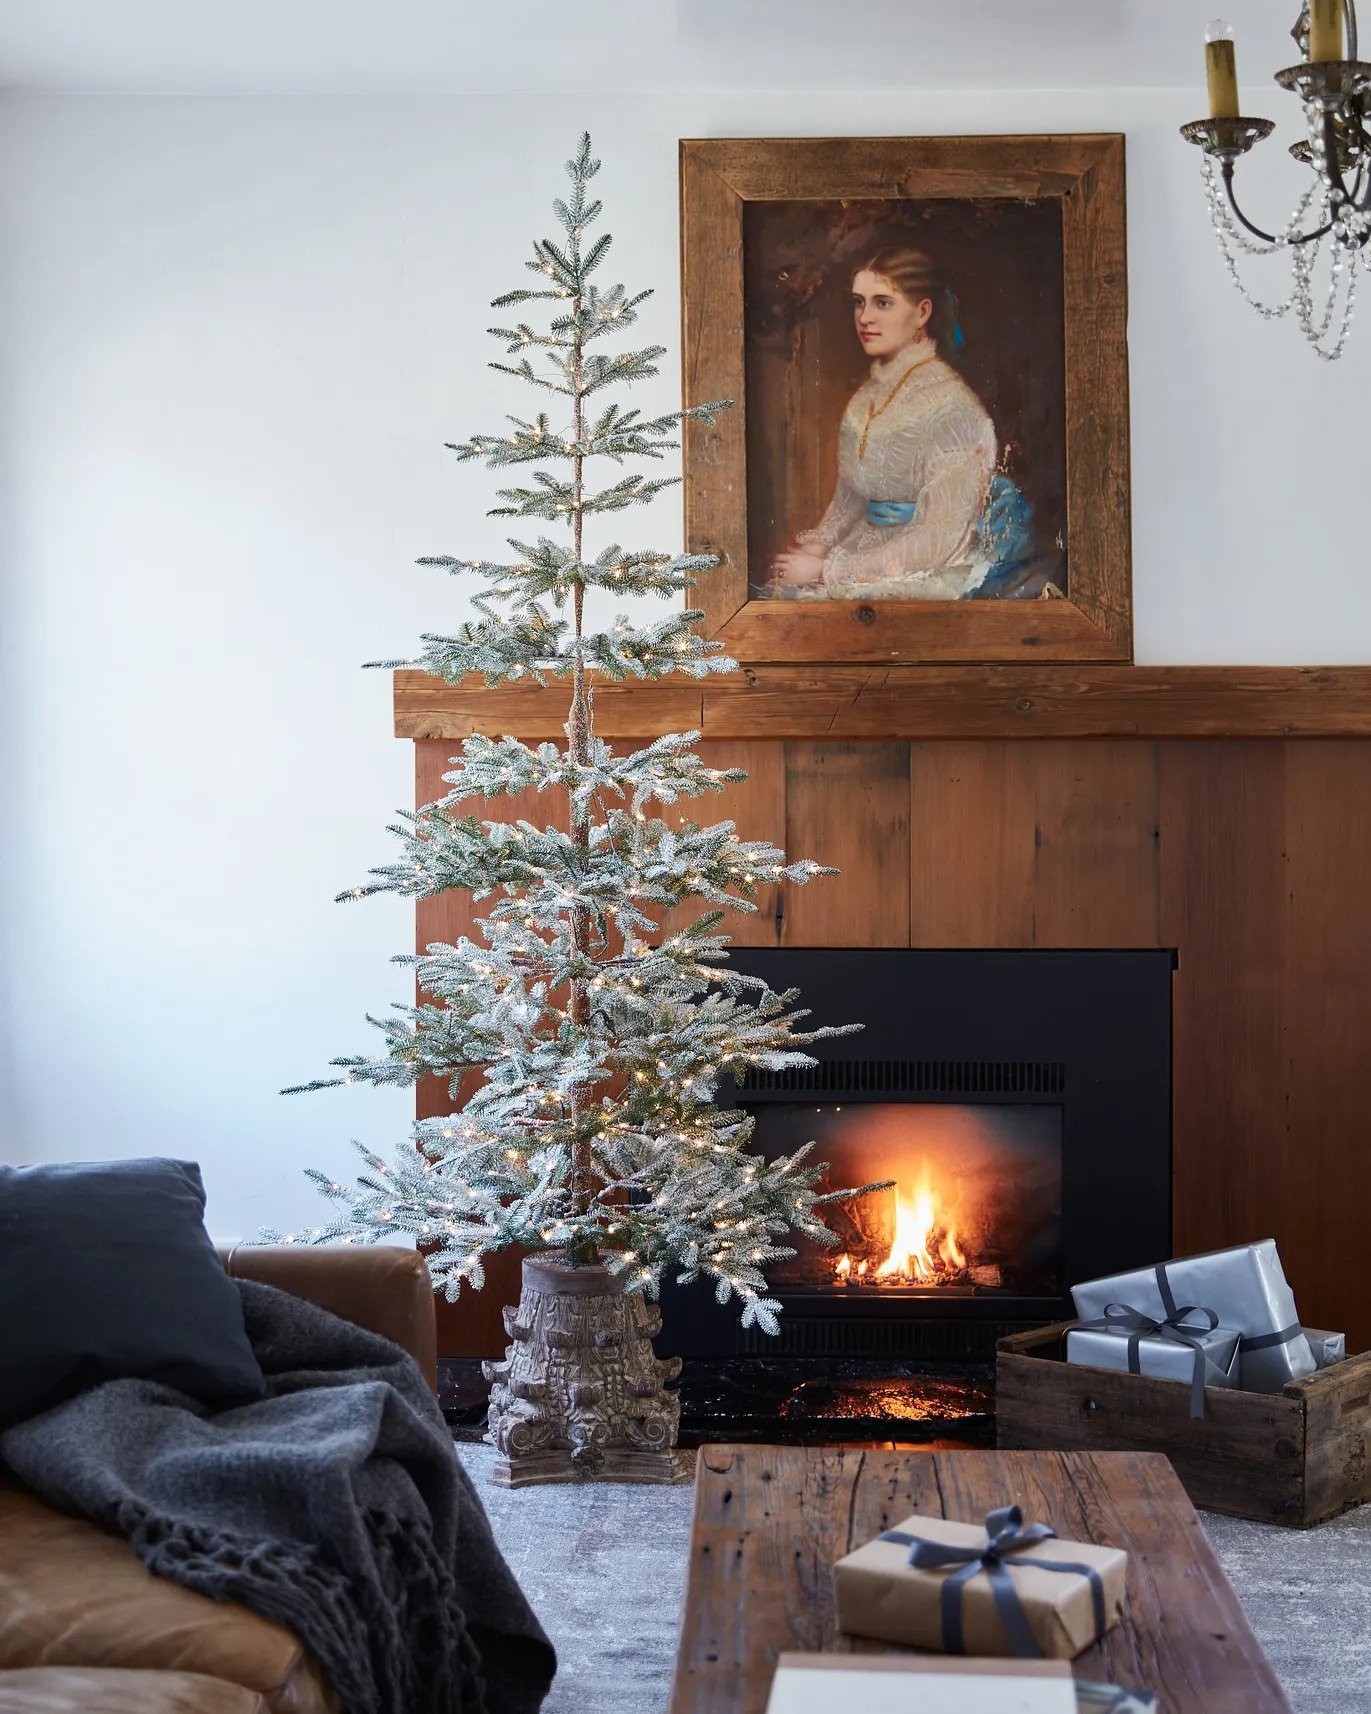 Christmas tree decorating styles and ideas. How to decorate your Christmas tree. Fairy twinkle lights. Icicle ornaments. Tinsel Christmas tree. Sparse Charlie Brown Christmas trees. | Nadine Stay | Balsam Hill